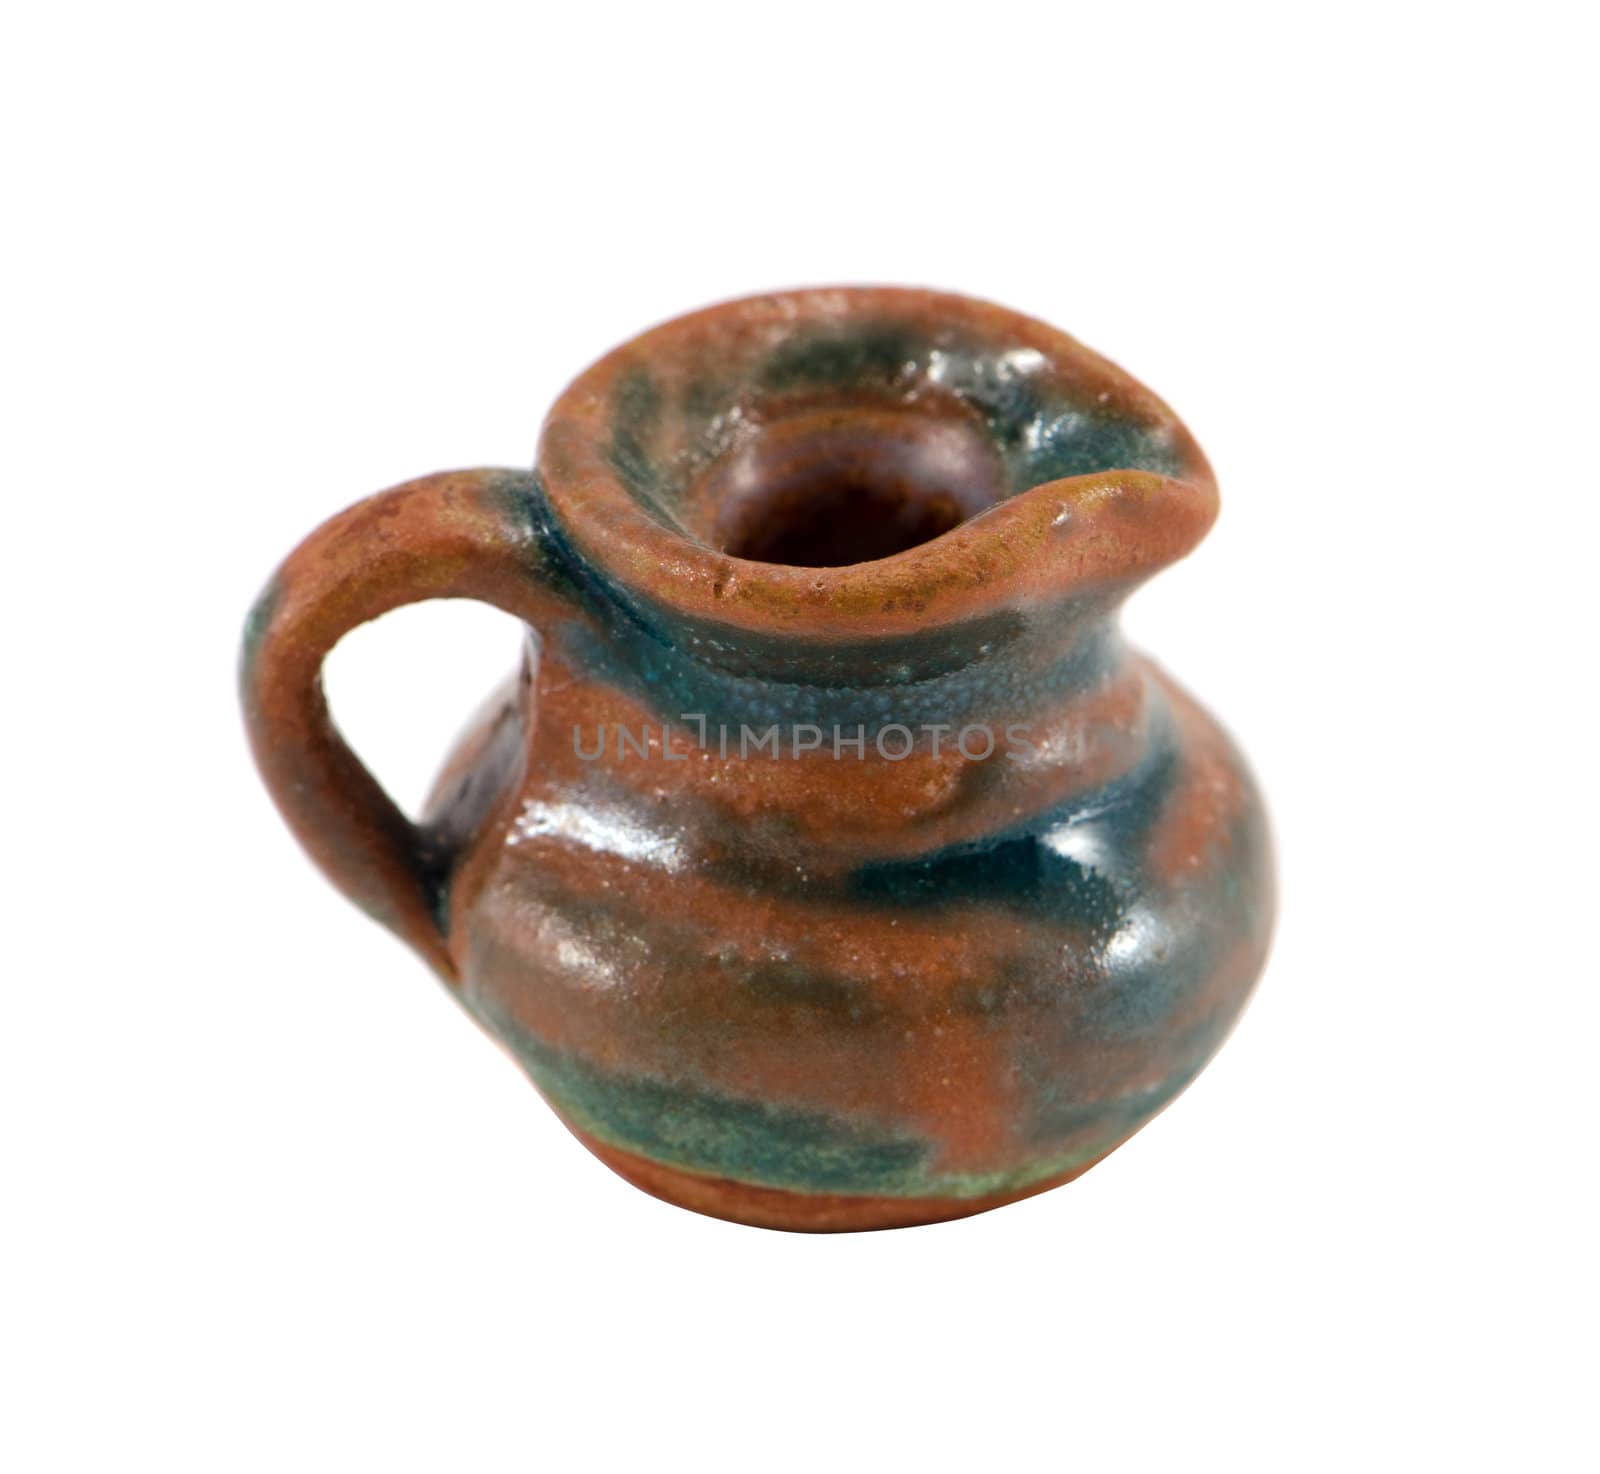 Vintage clay pitcher brown green color small object with handle isolated on white background. Home handmade decoration.